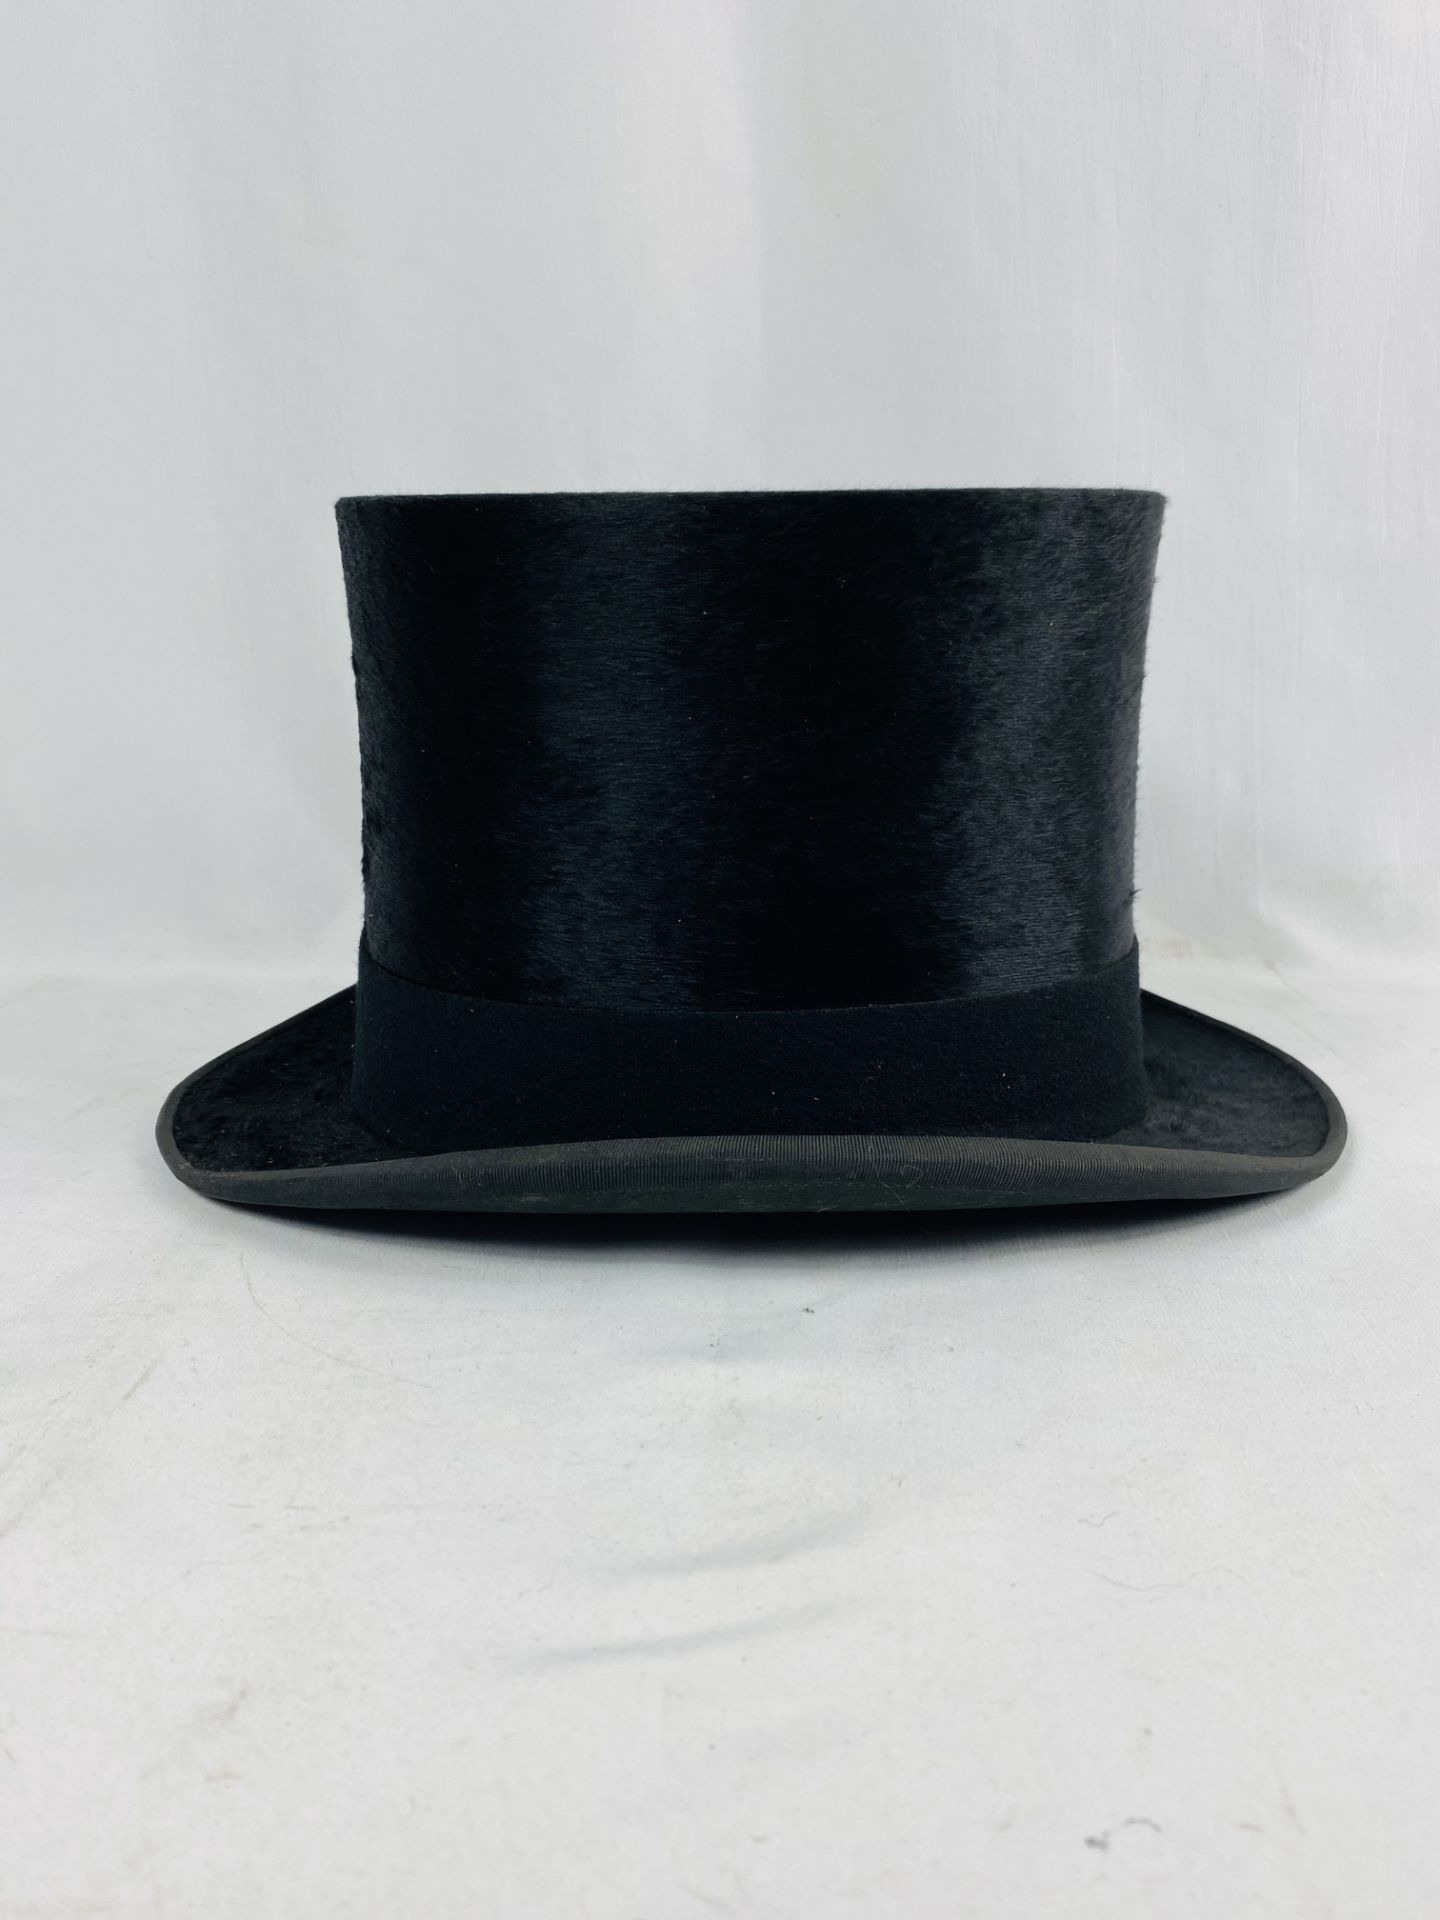 Dunn & Co childs silk top hat - Image 6 of 7